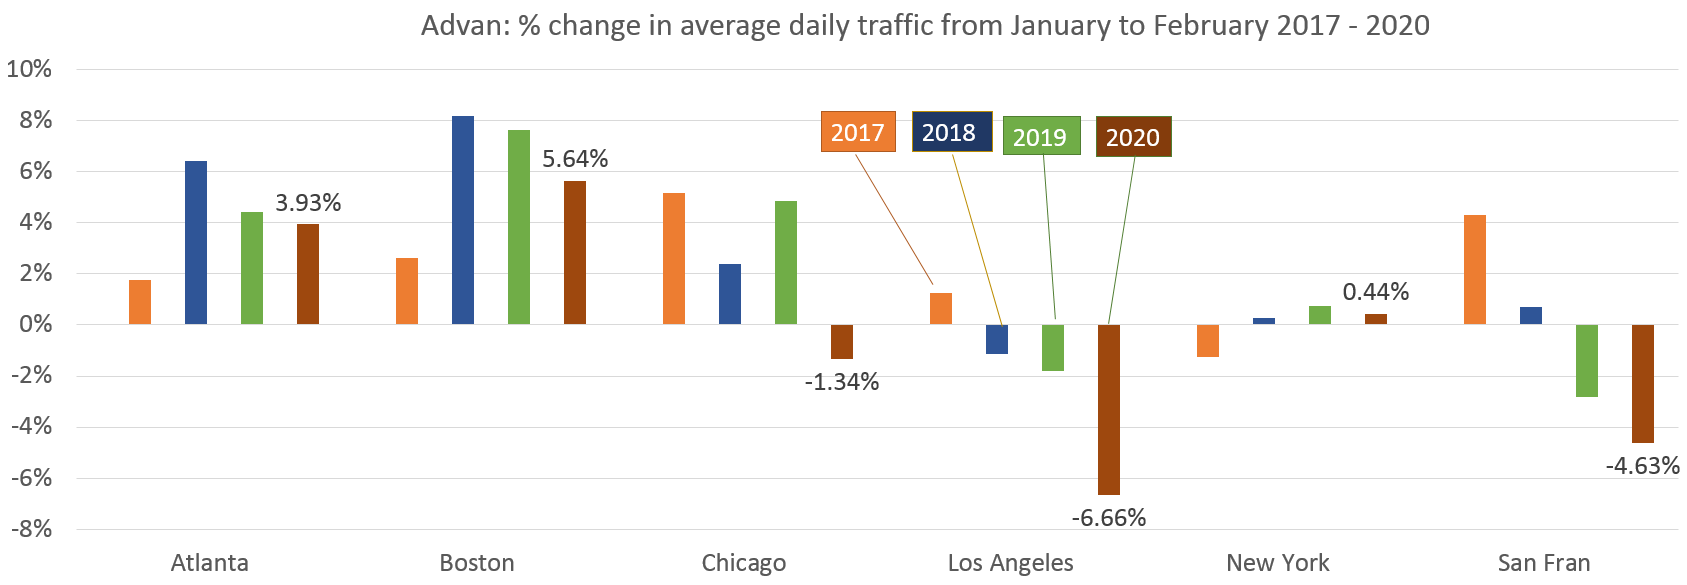 Advan: pct change in airport average daily traffic from January to February 2017 - 2020